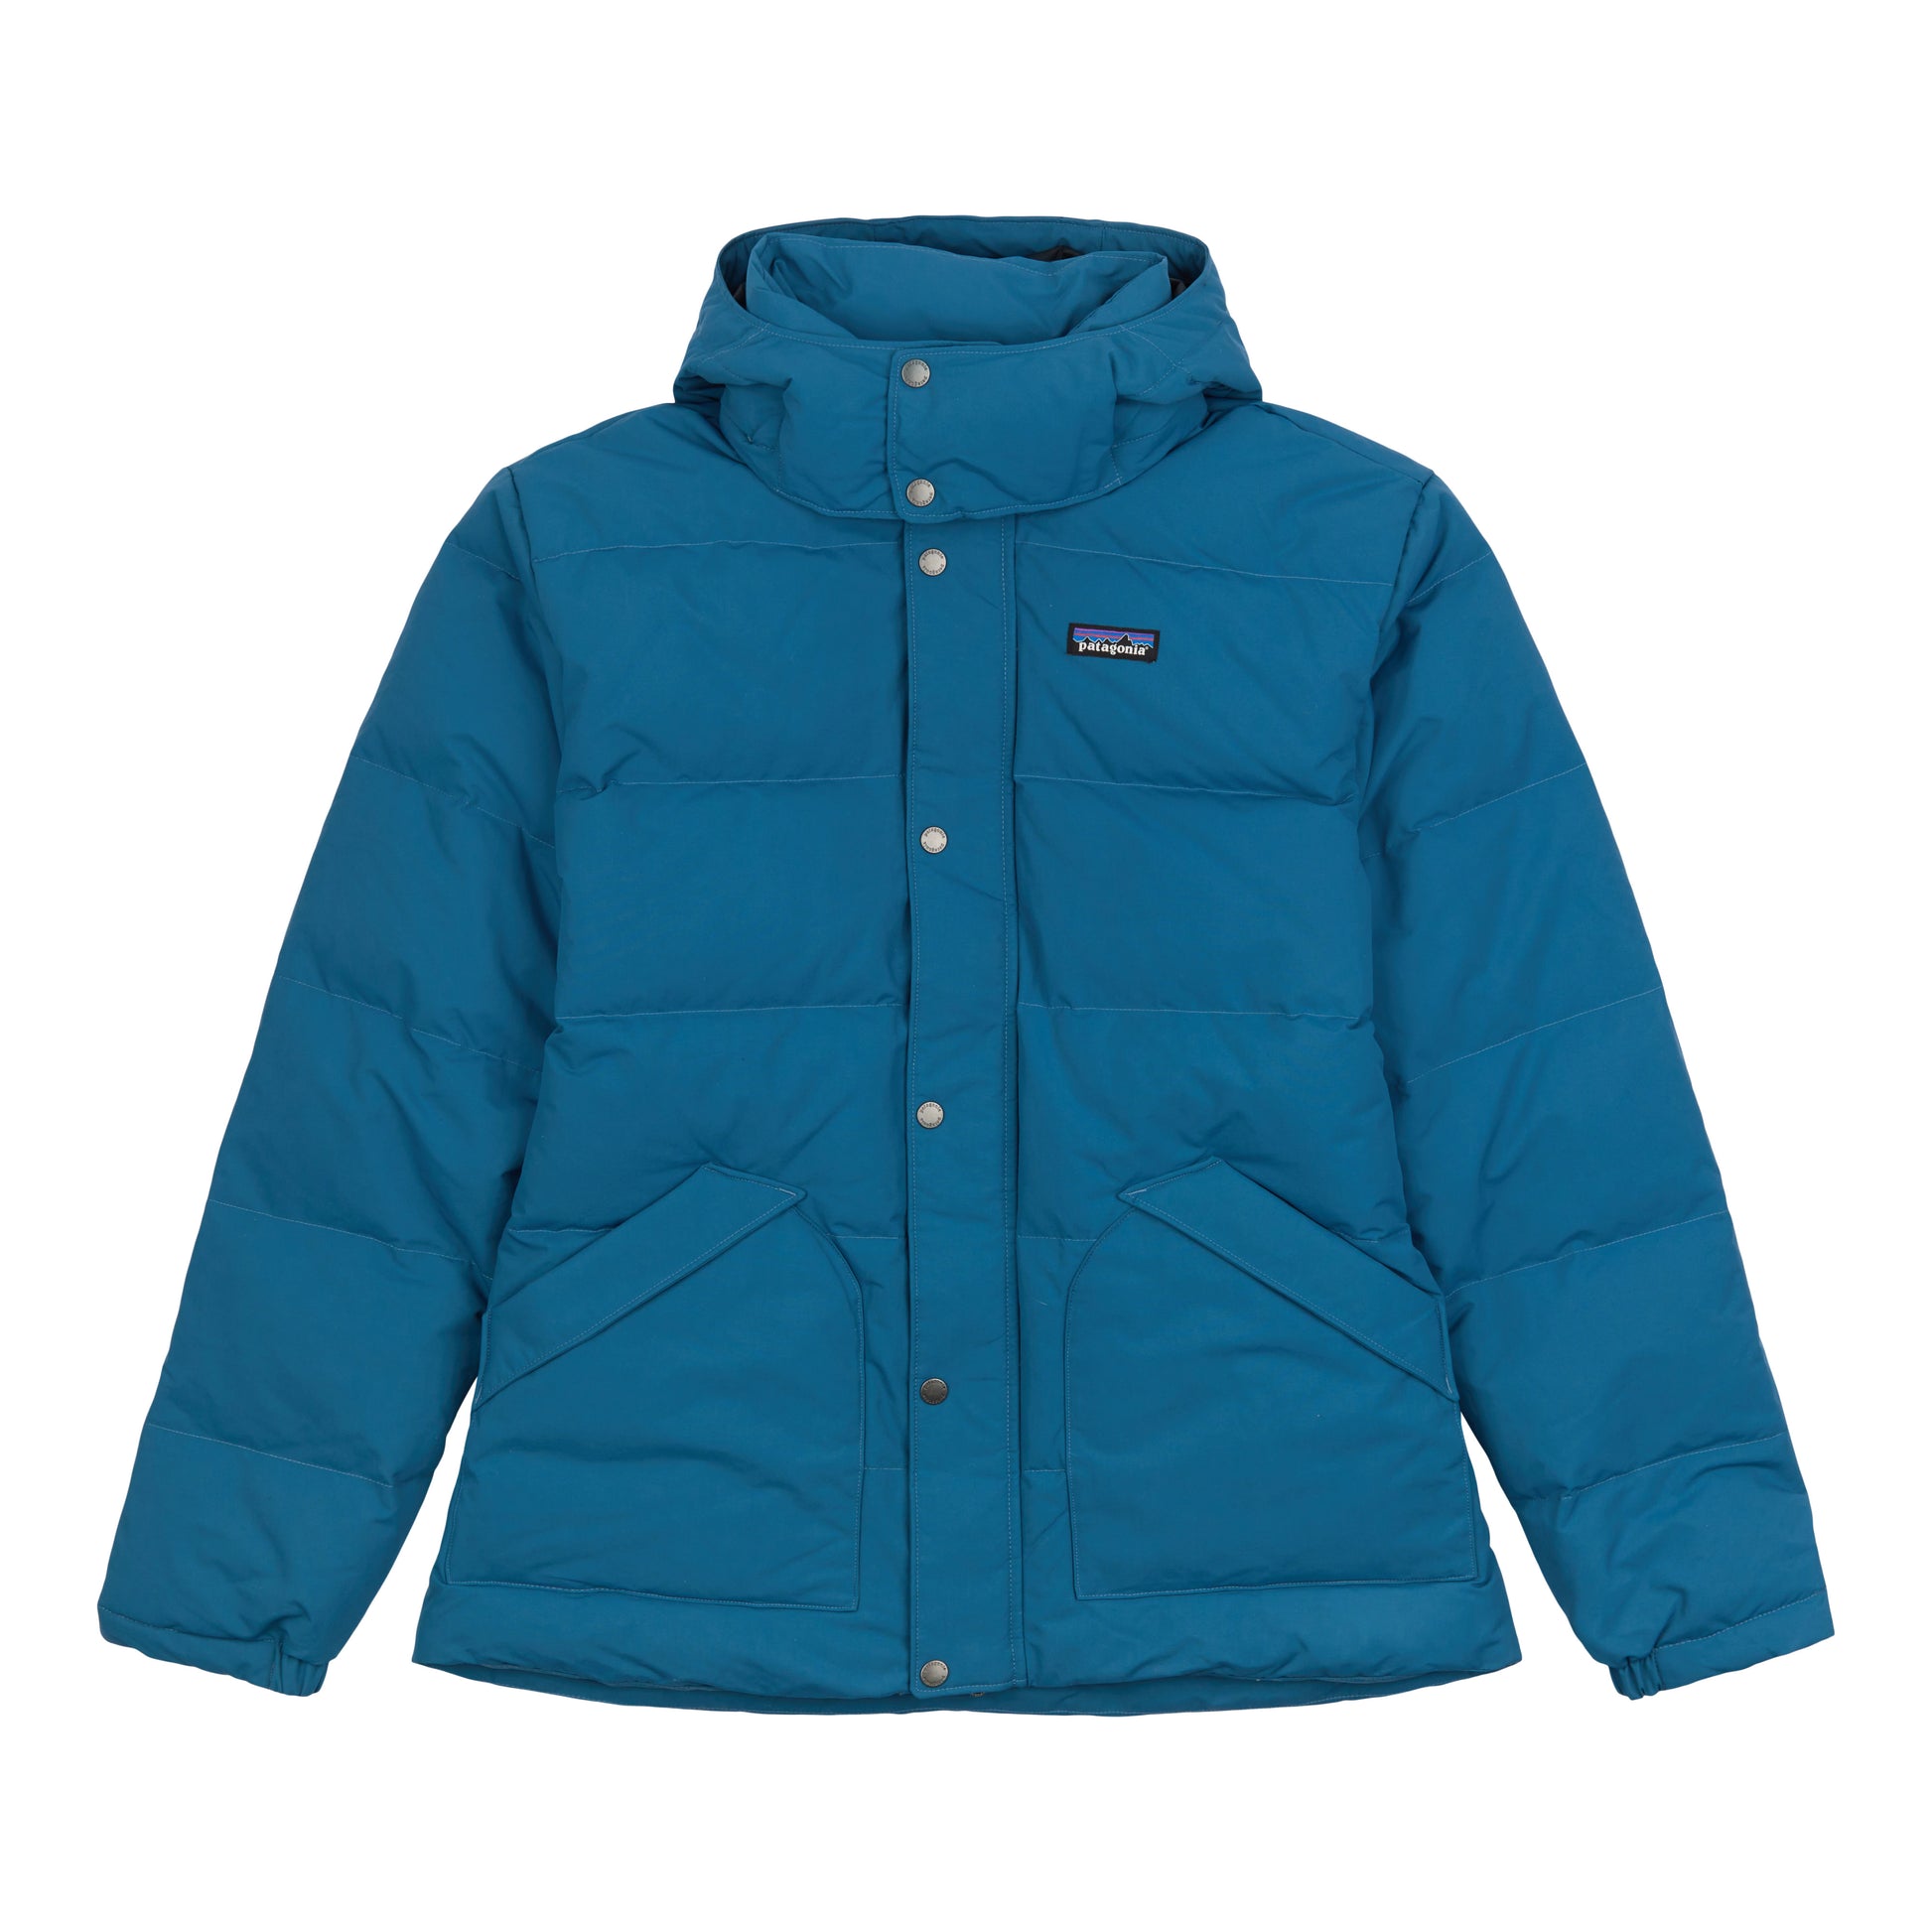 The Pocket on Your Patagonia Fleece Has a Secret Feature